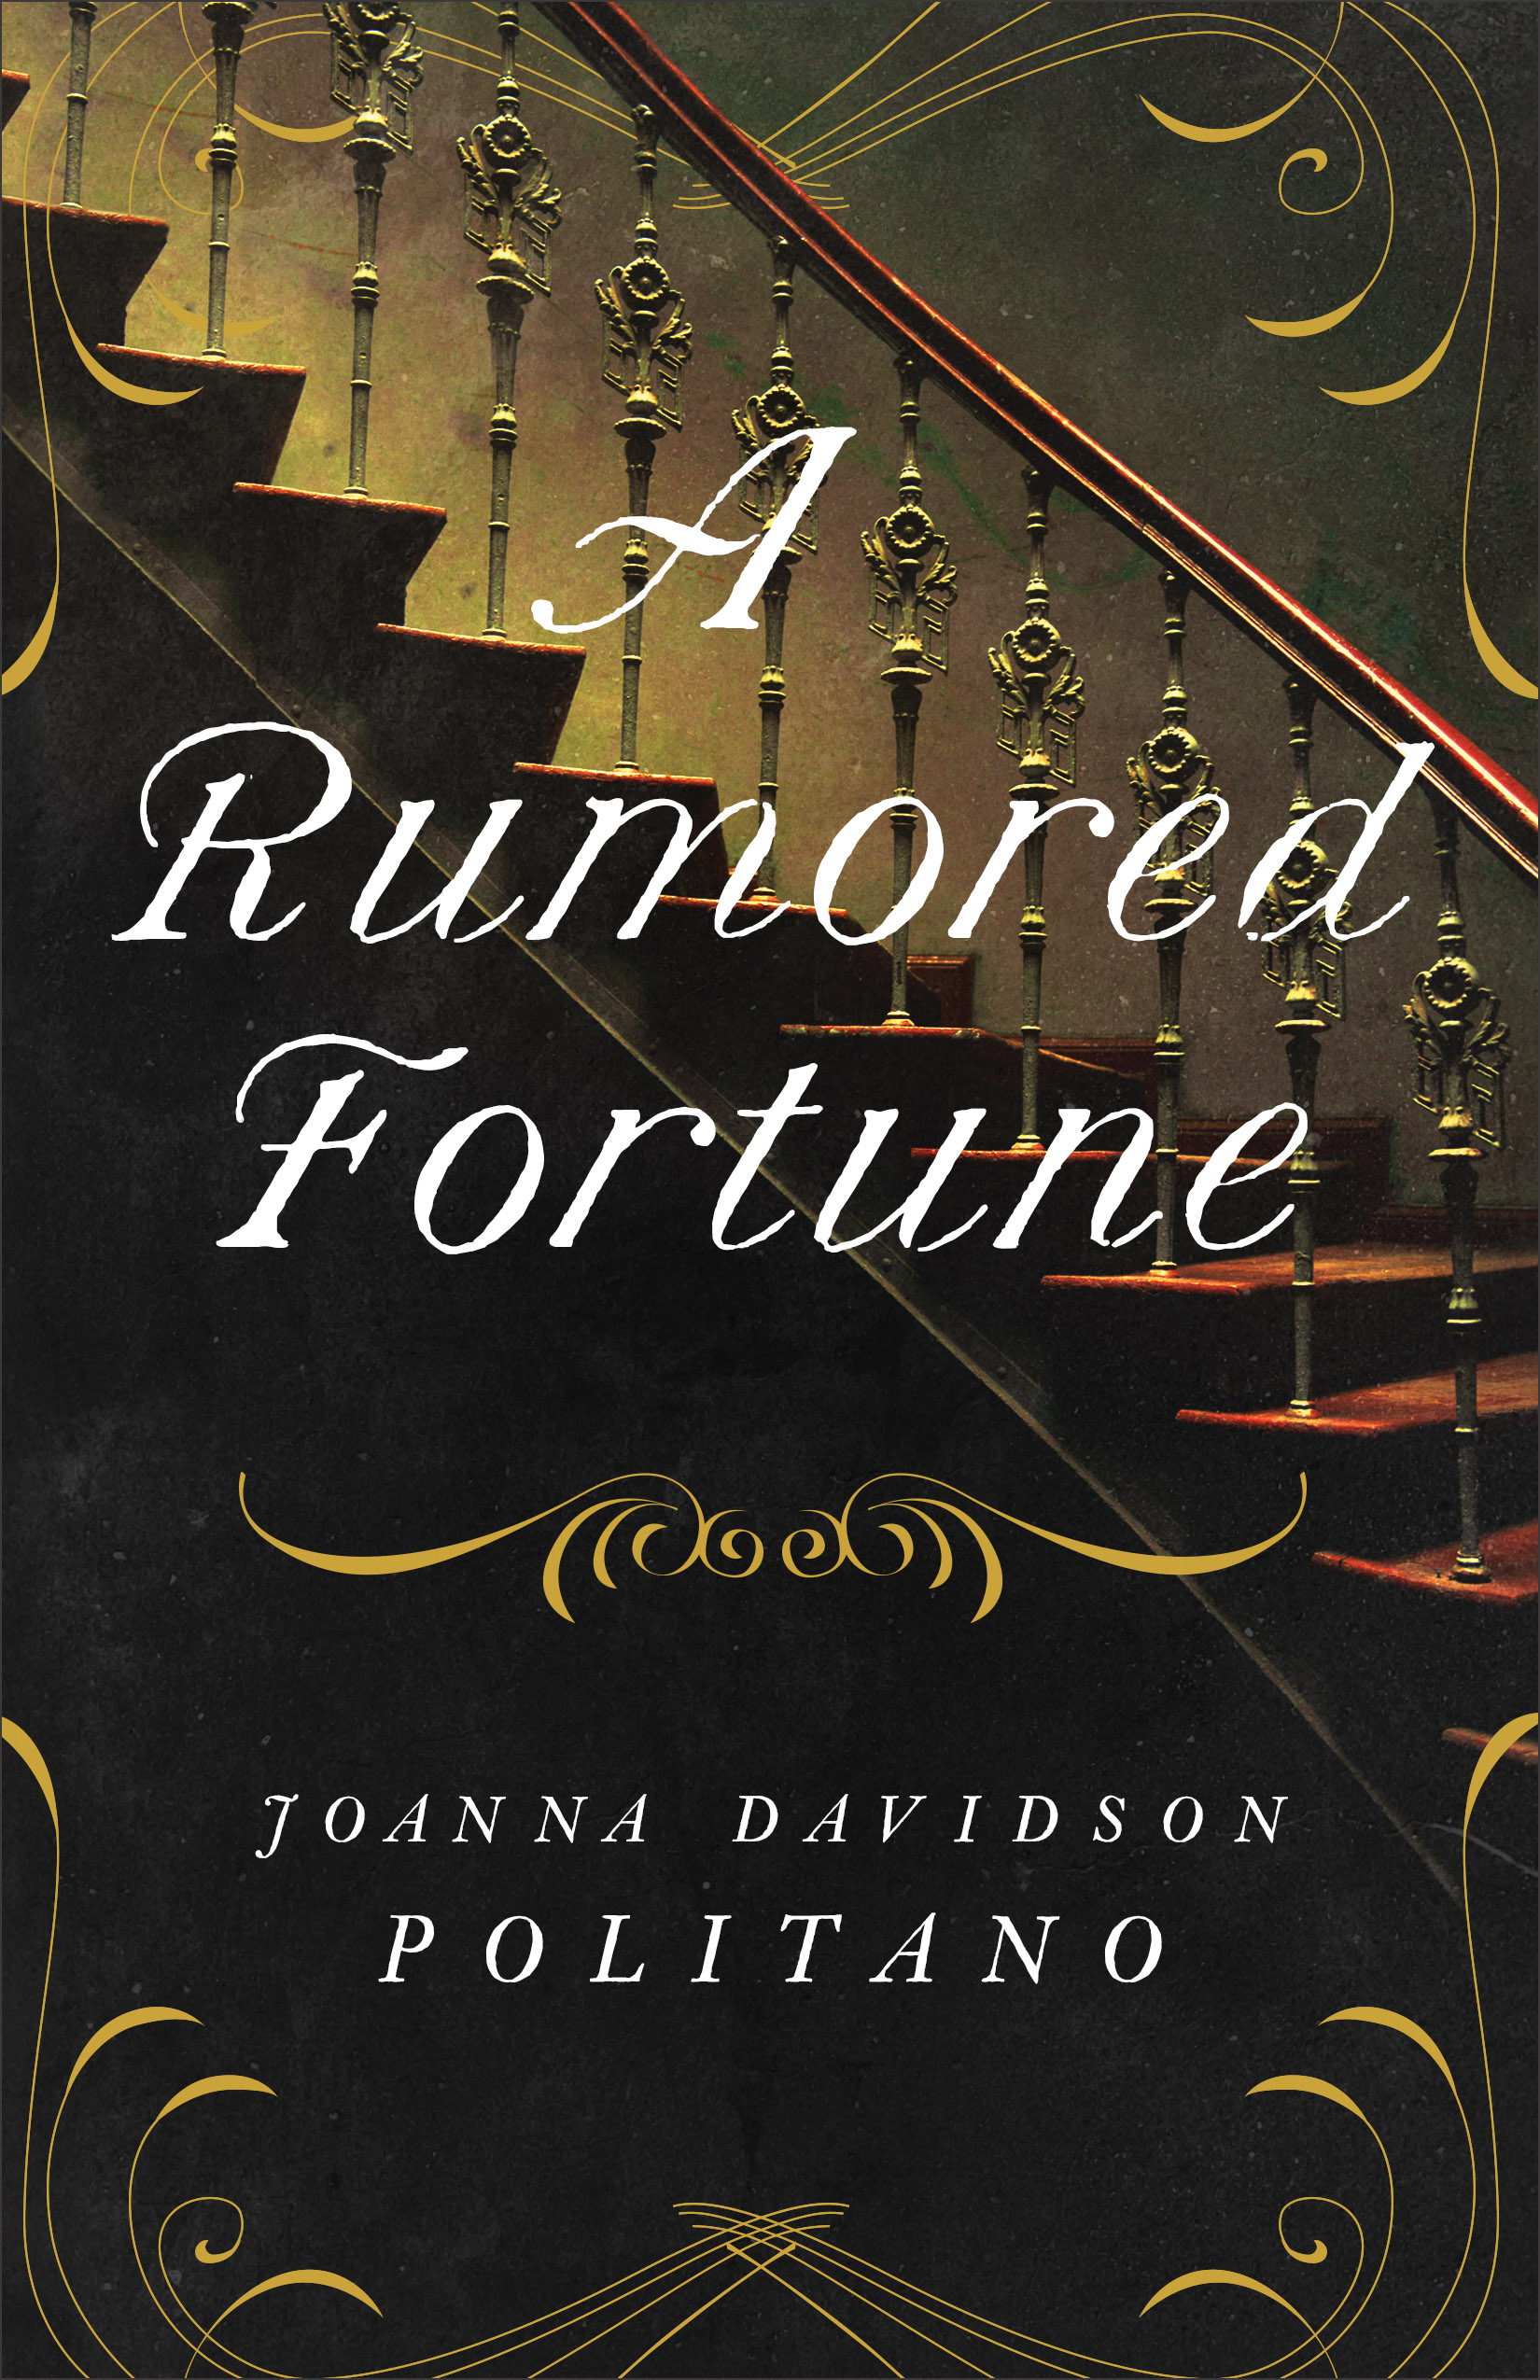 Guest Post by Joanna Davidson Politano, author of A Rumored Fortune